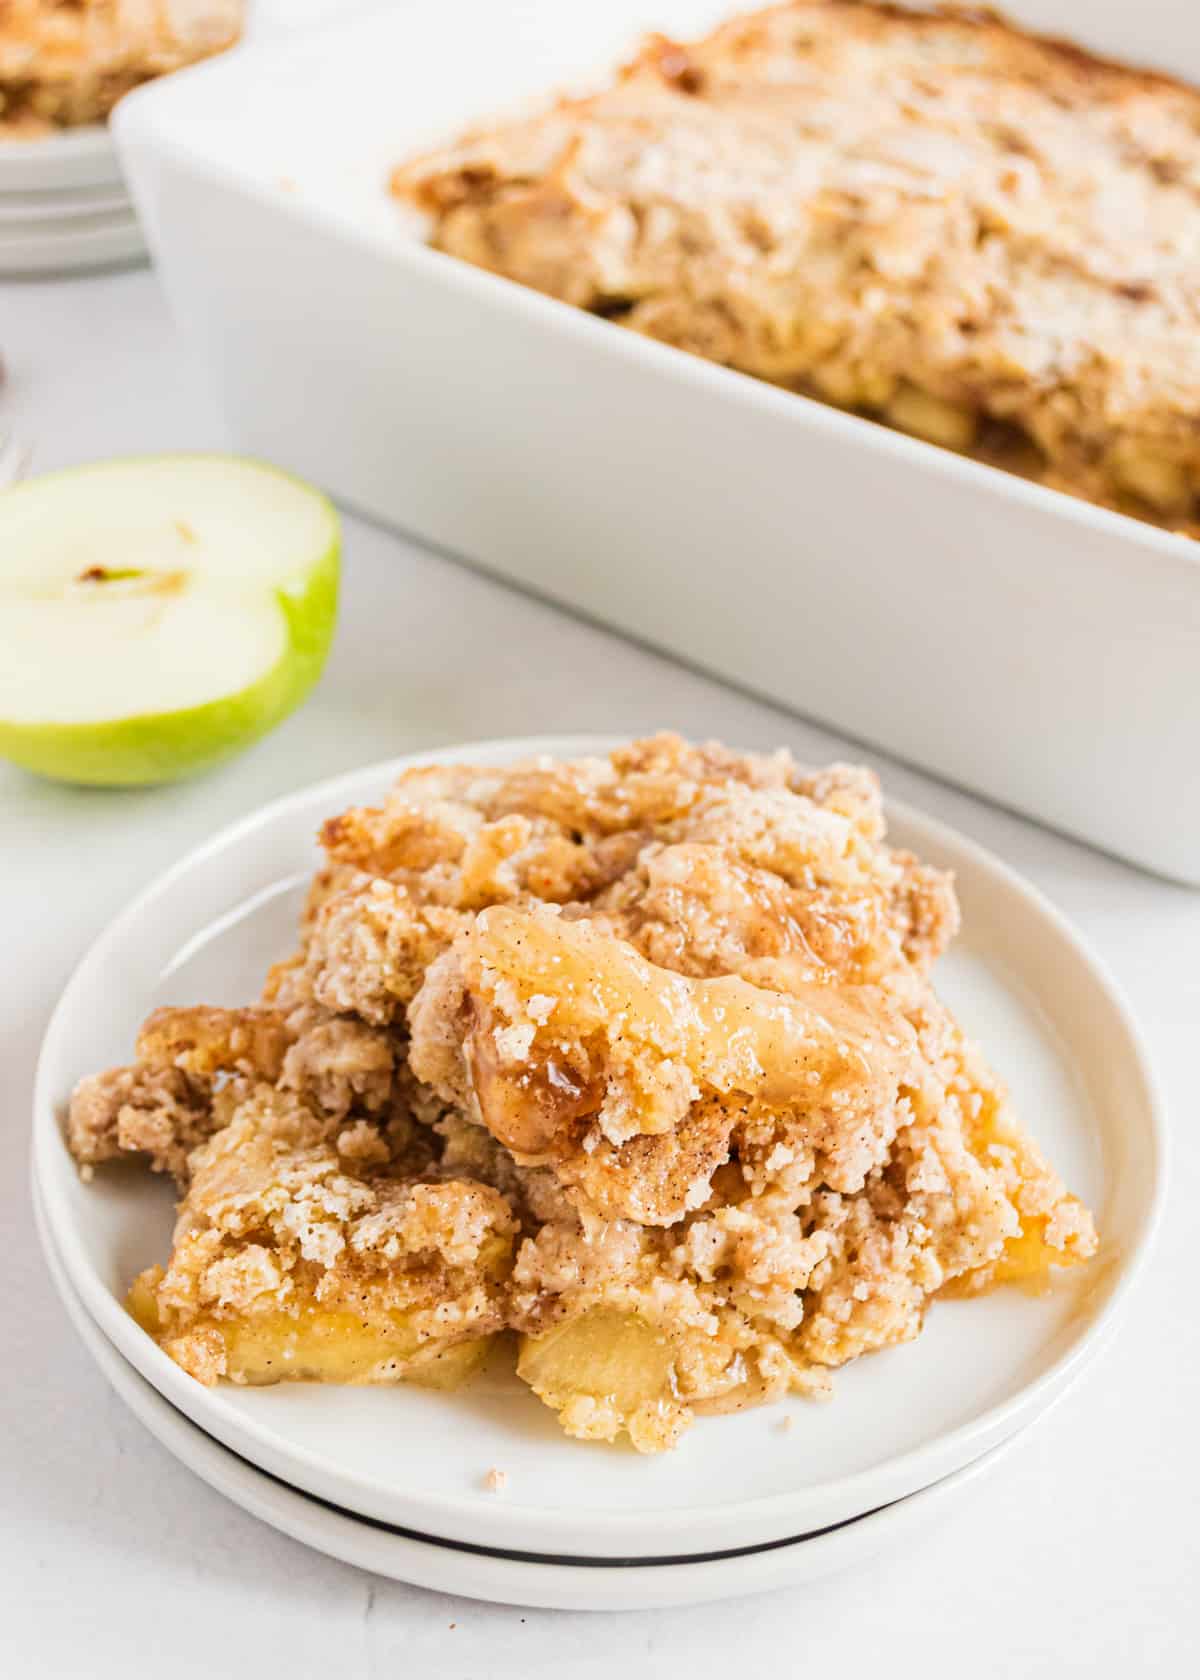 Slow Cooker Cake Mix Apple Cobbler Recipe (only 3 ingredients!)